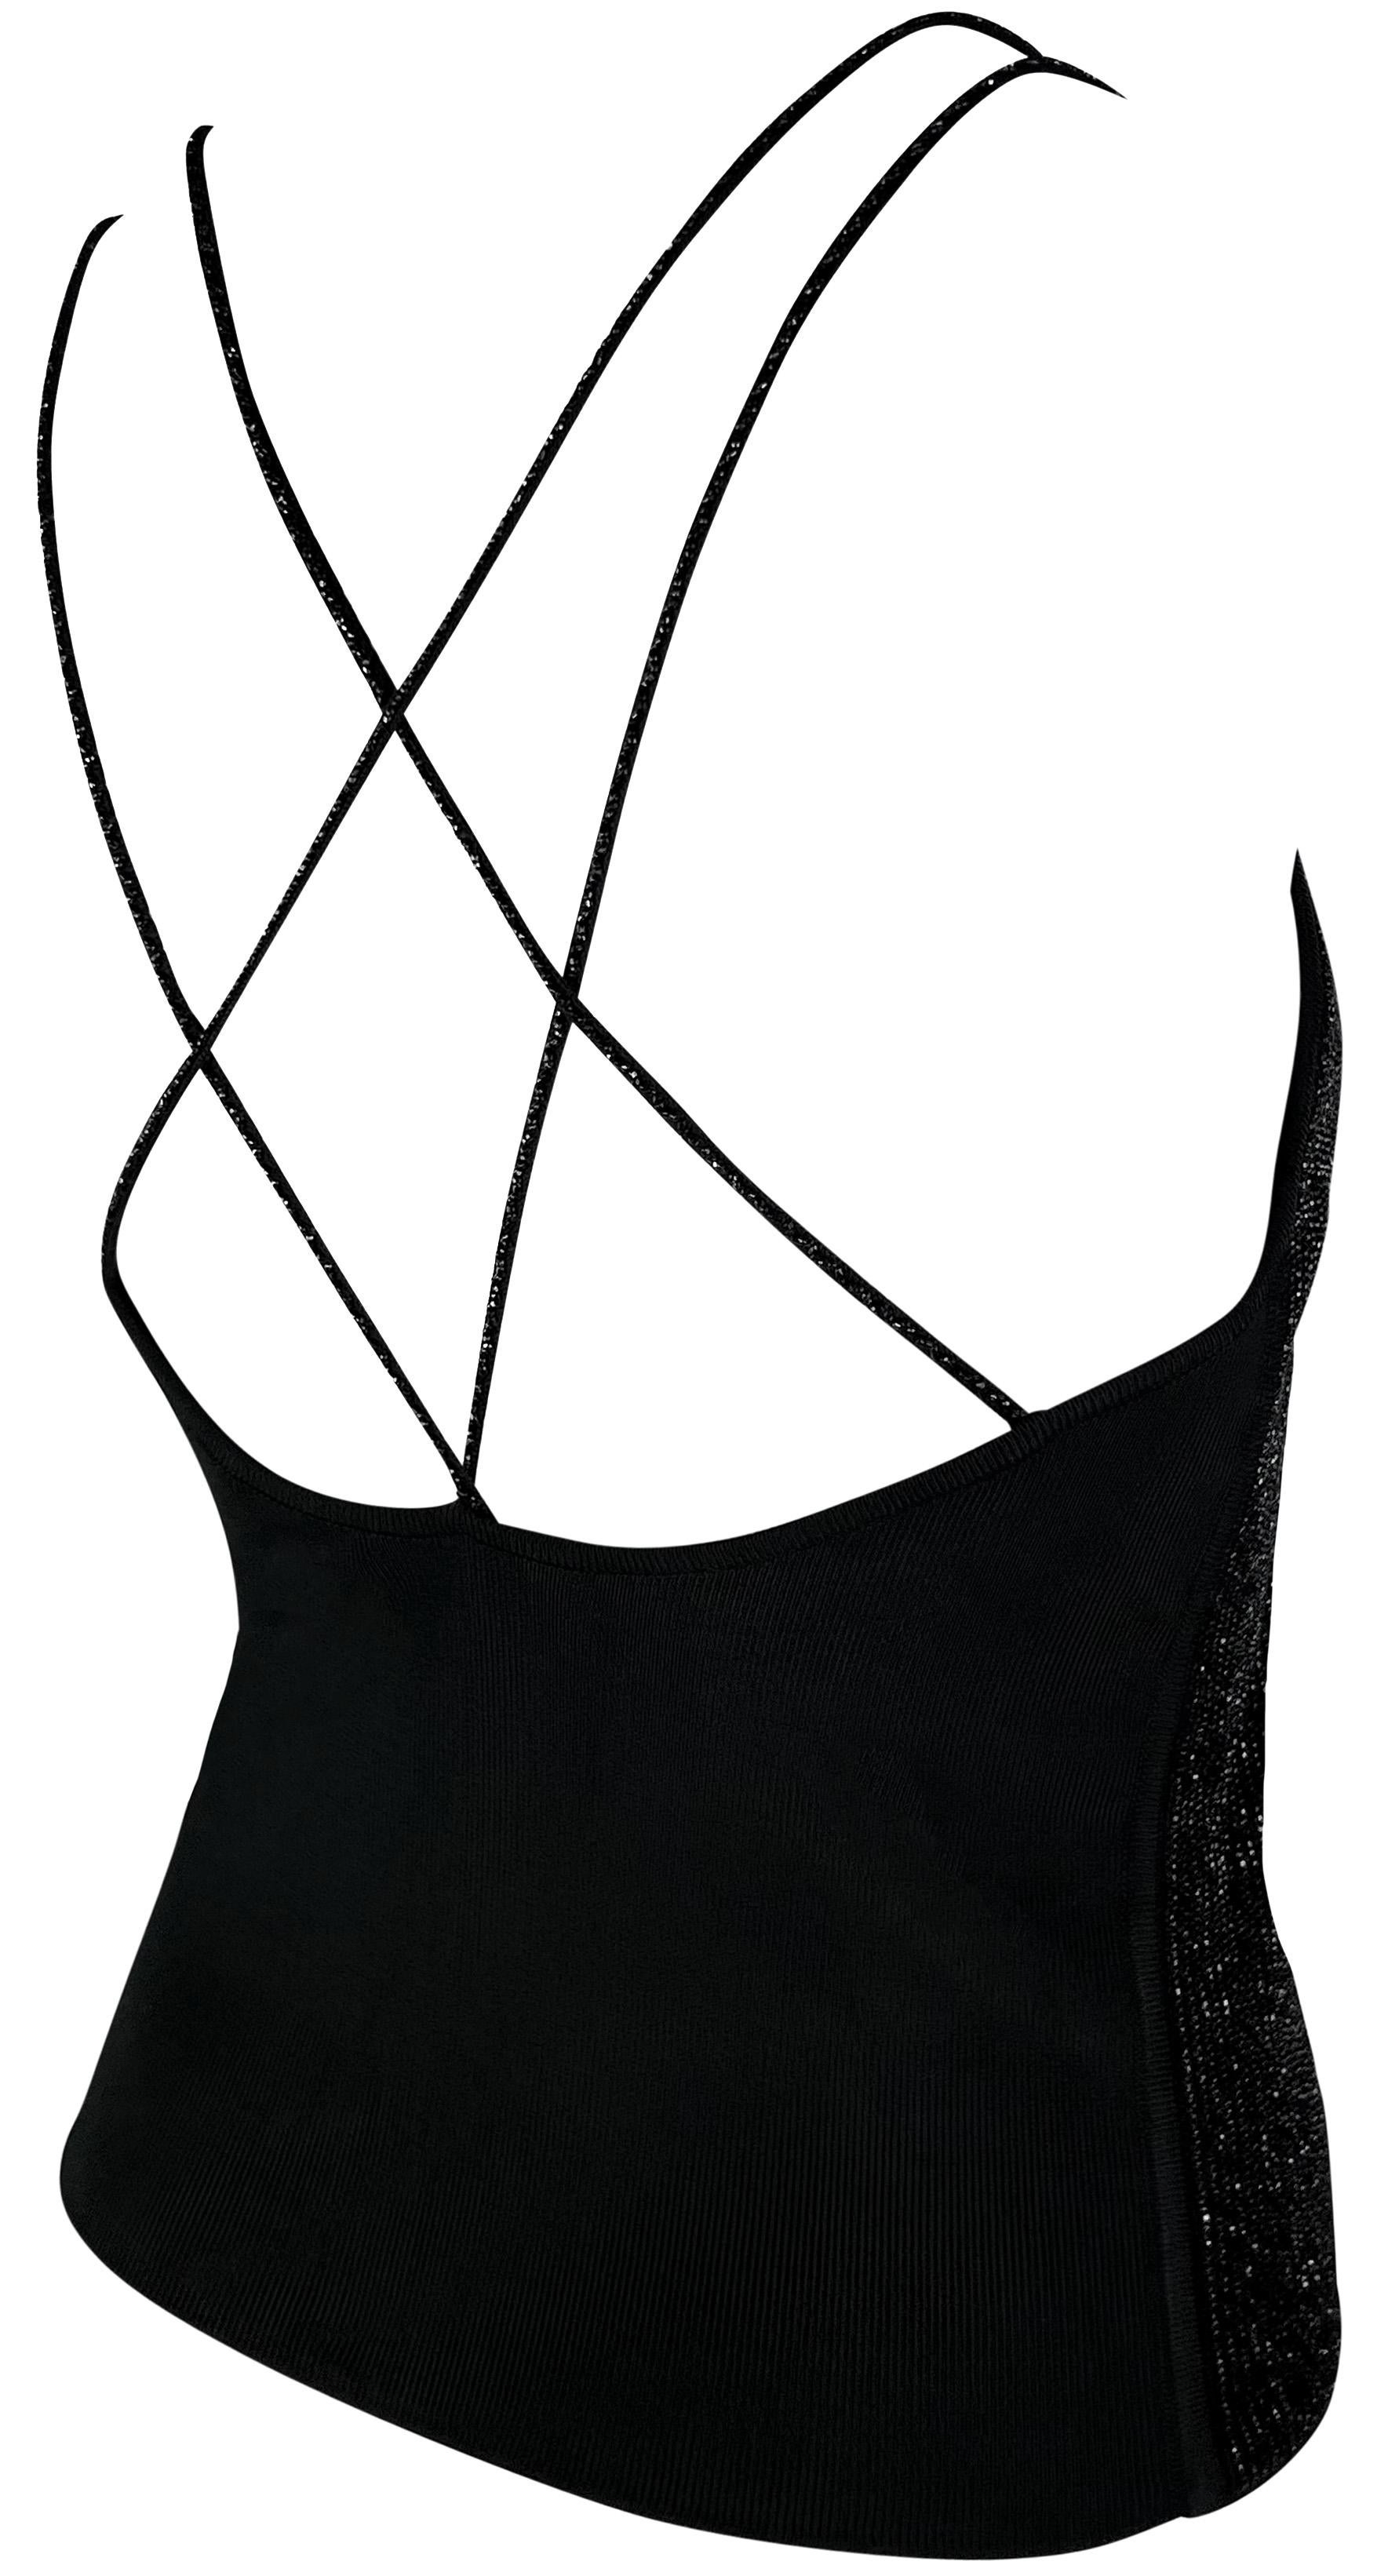 This fabulous 1990s black Giorgio Armani tank top is covered in thousands of shiny black beads. The top features two shoulder straps on either side that cross over a semi-exposed back. The perfect elevated essential, this vintage Giorgio Armani tank